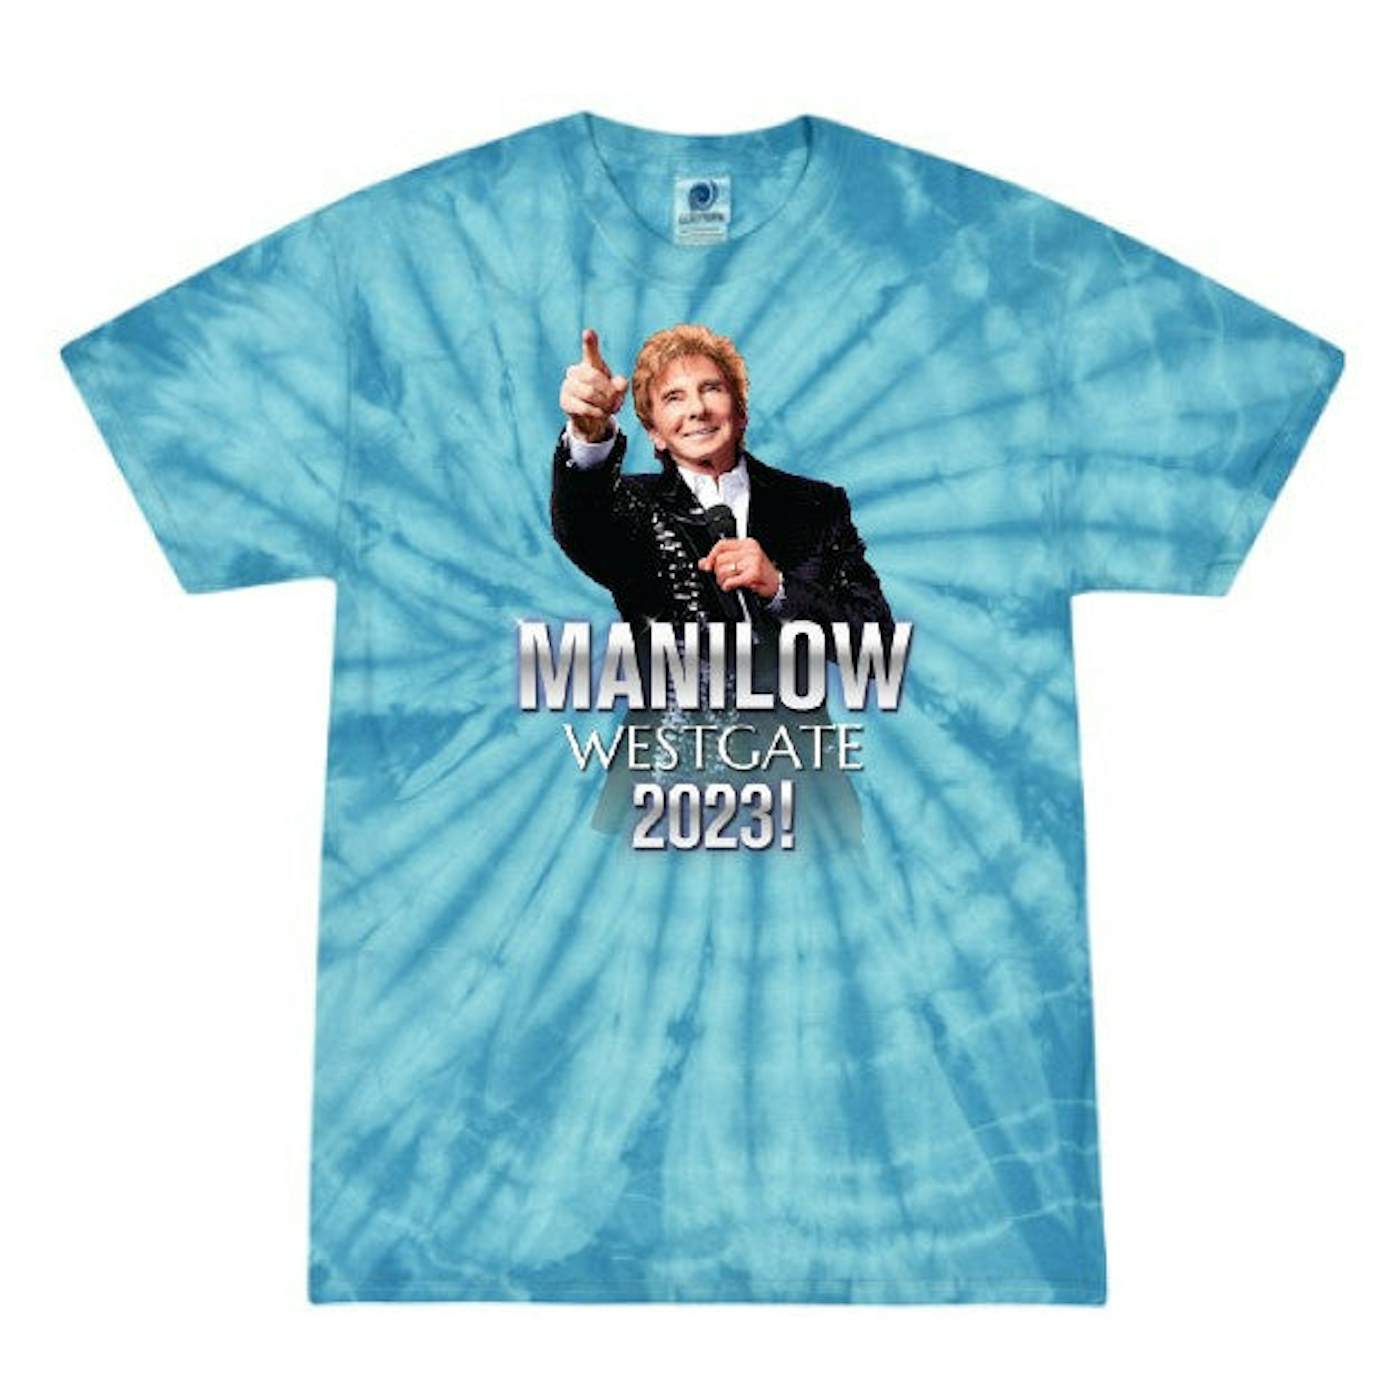 Barry Manilow Manilow Westgate 2023! Shirts